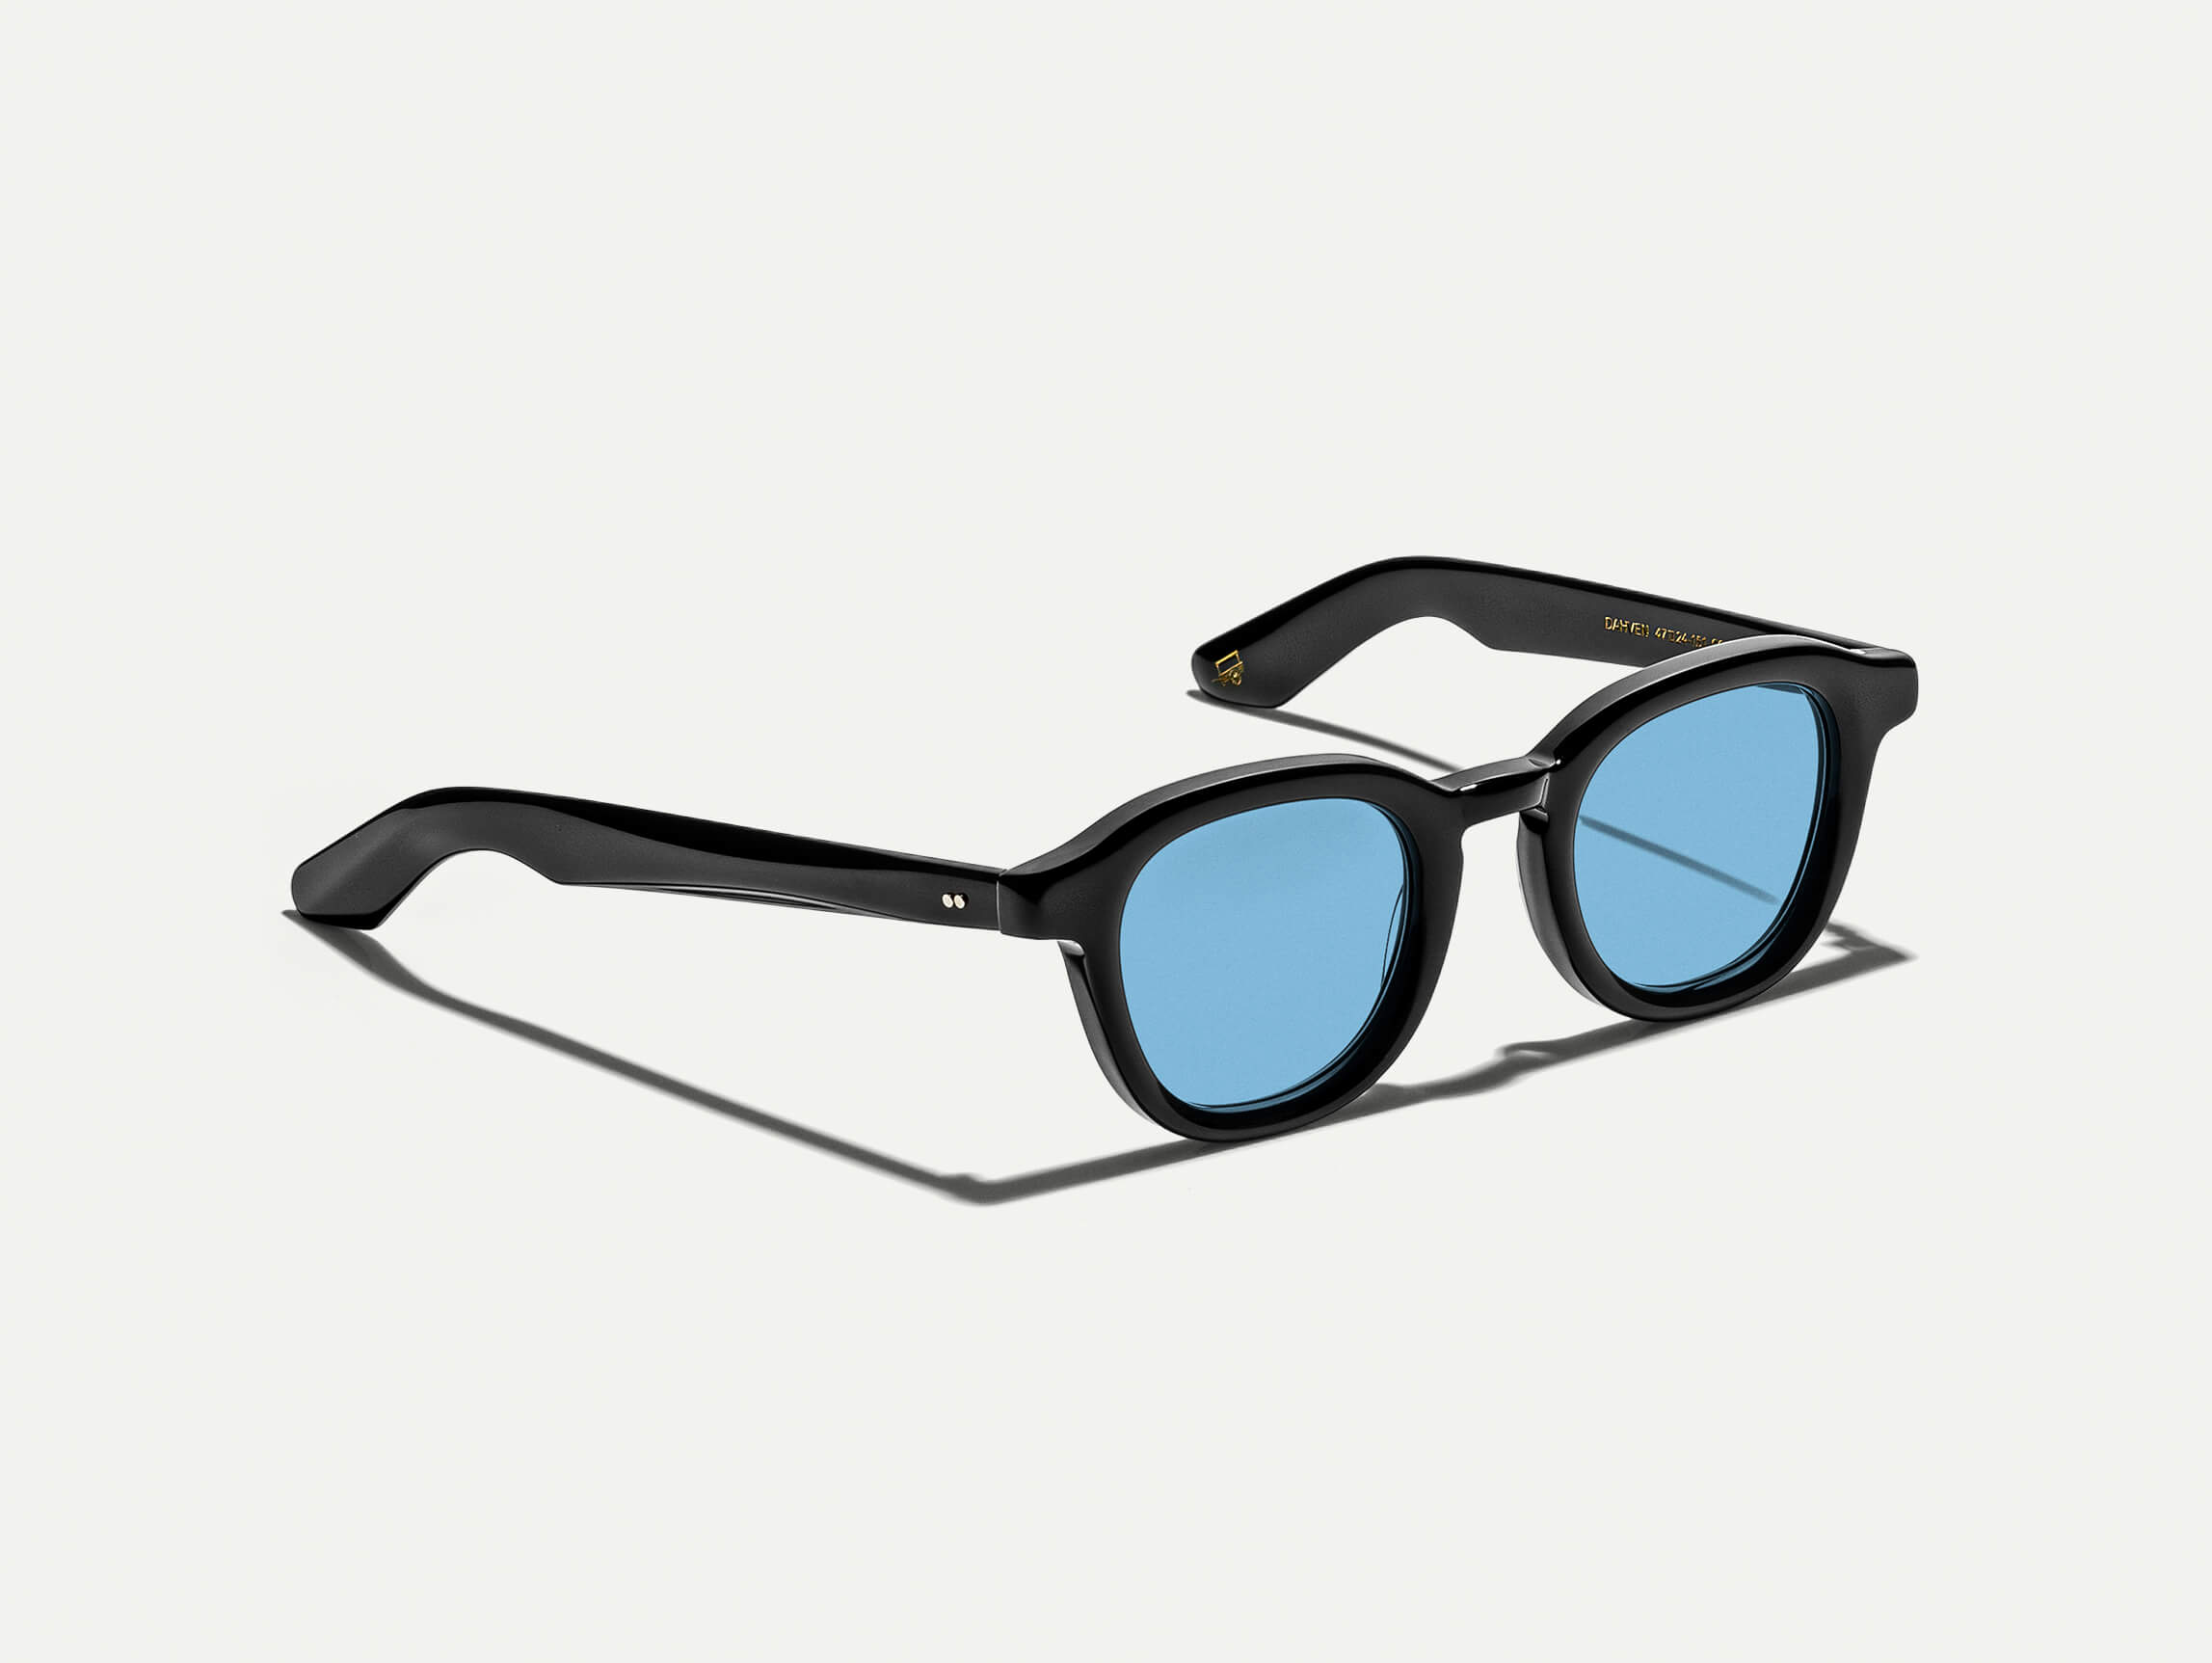 The DAHVEN Black with Celebrity Blue Tinted Lenses